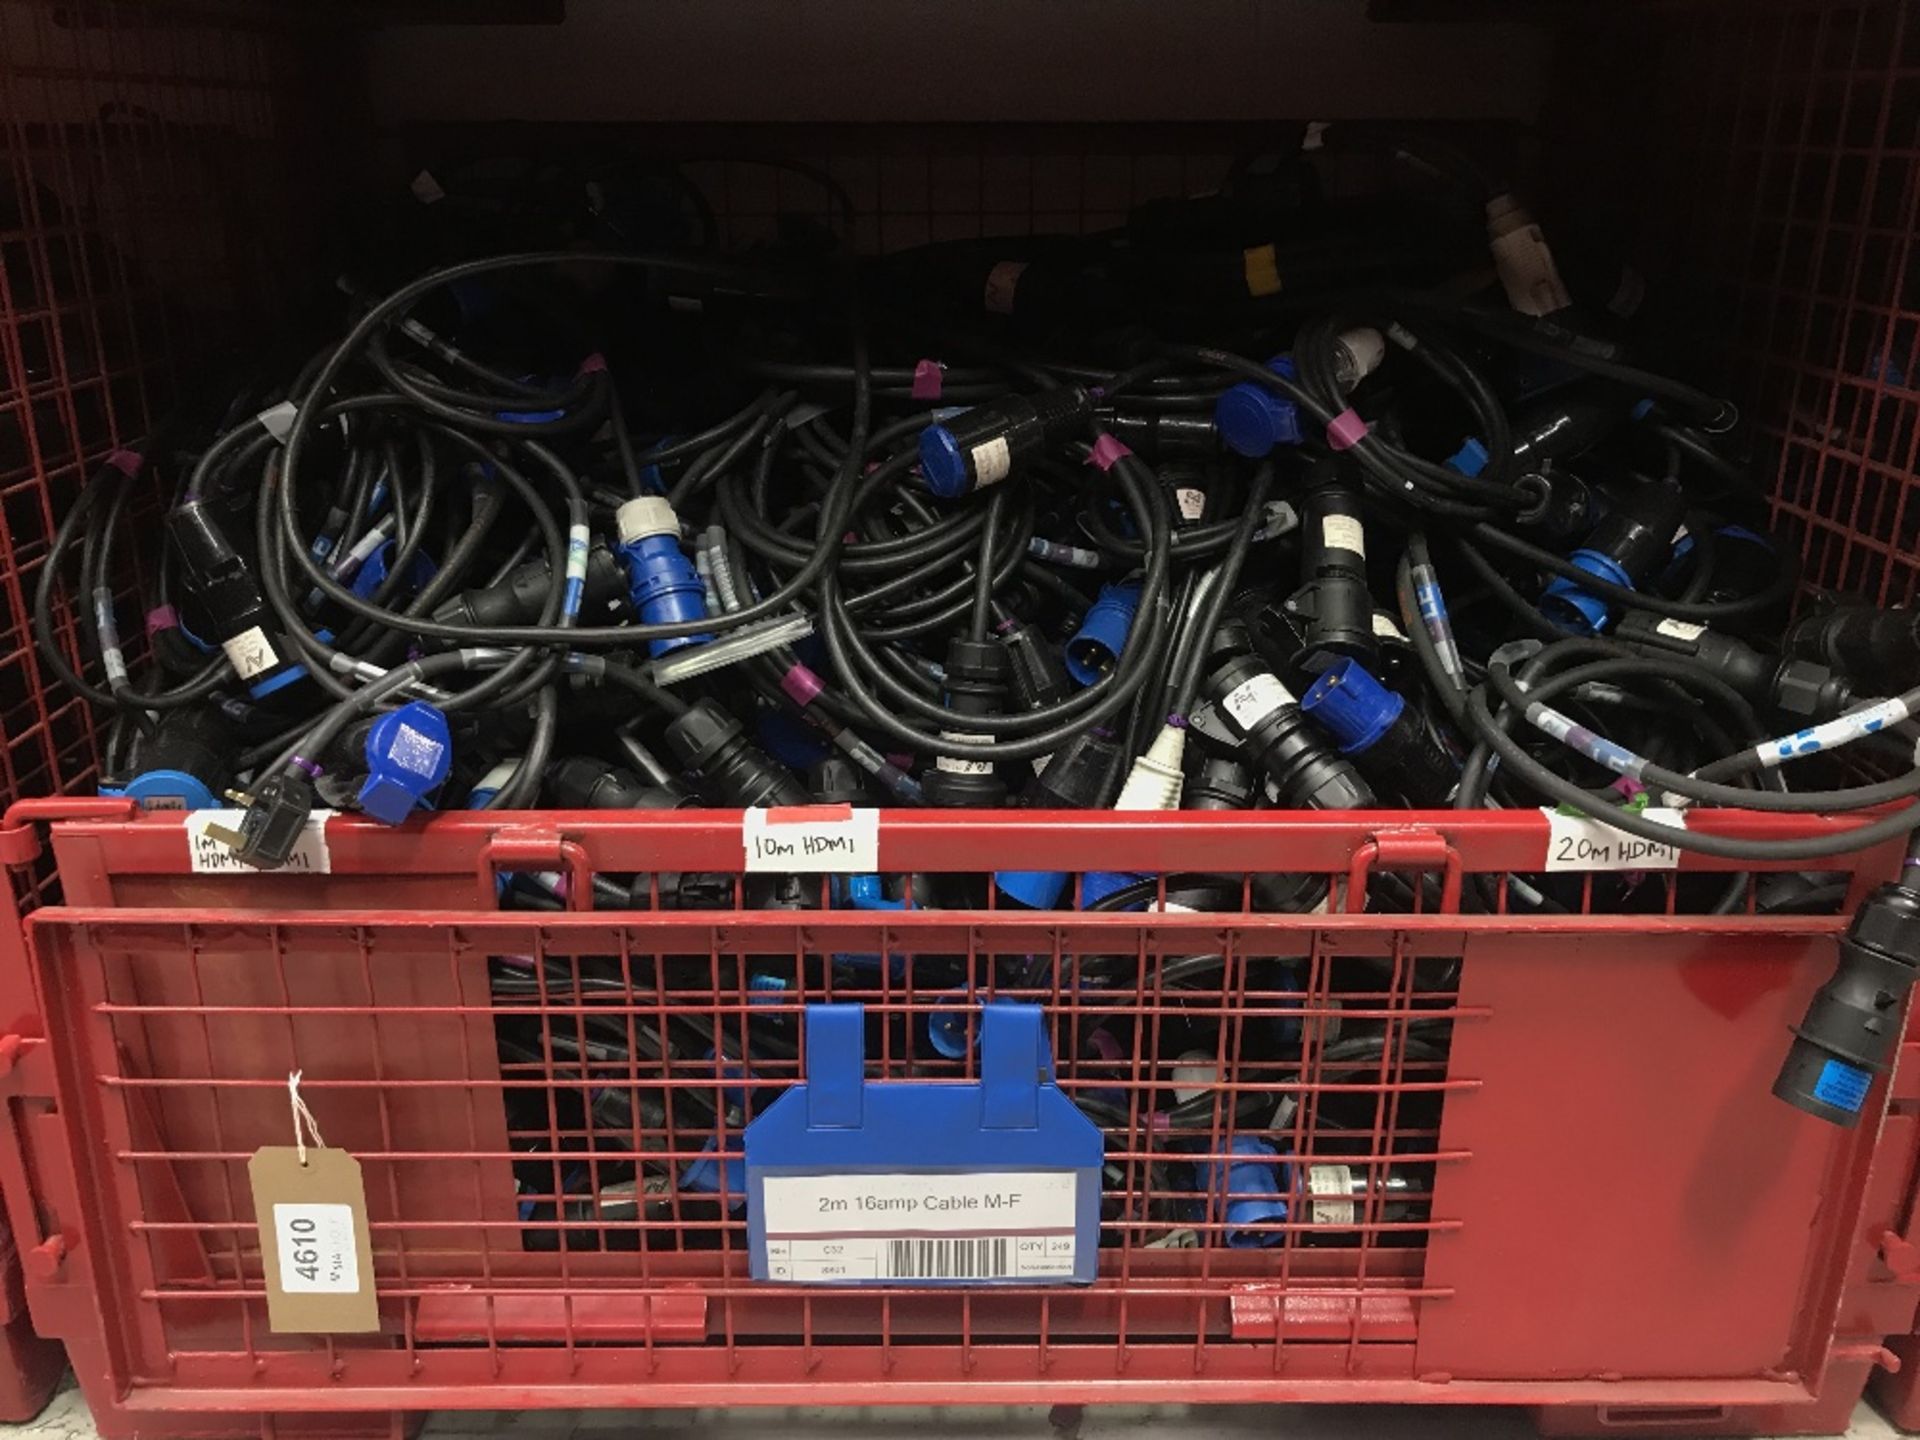 Large Quantity of 2m 16amp Cable M-F with Steel Fabricated Stillage